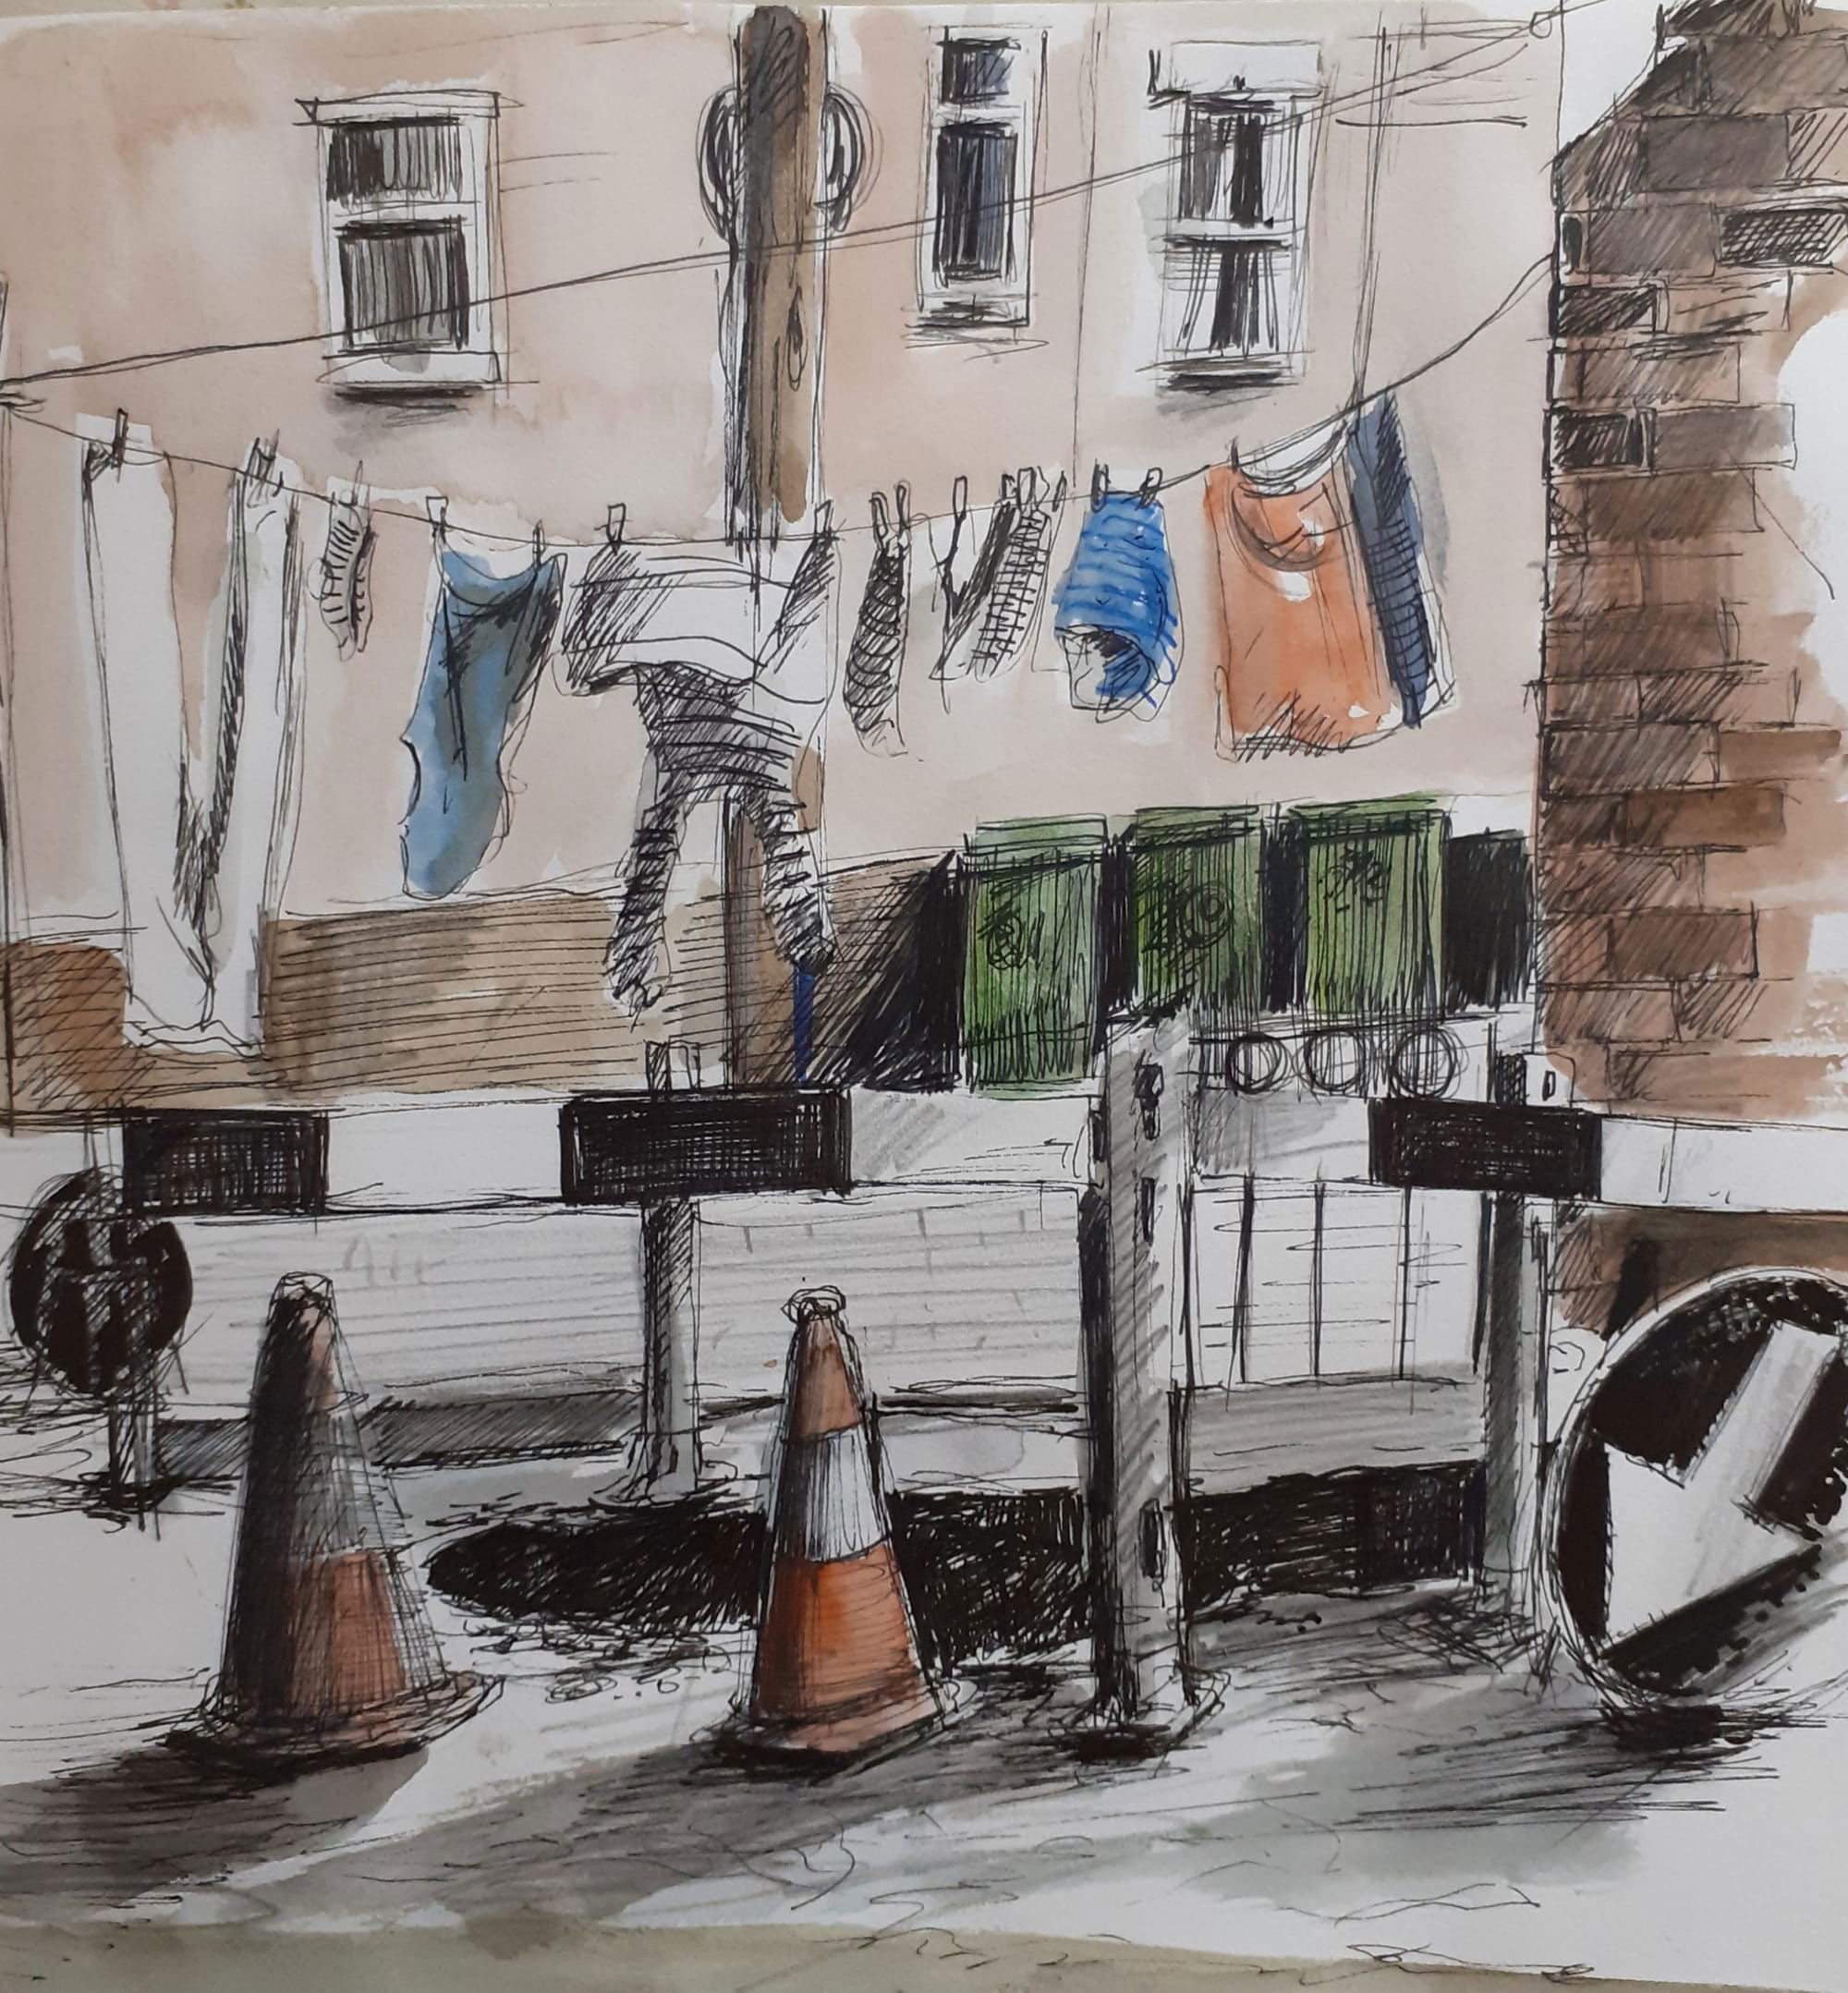 Washing Line, 30cm x 0cm, mixed media on paper 2018 SOLD